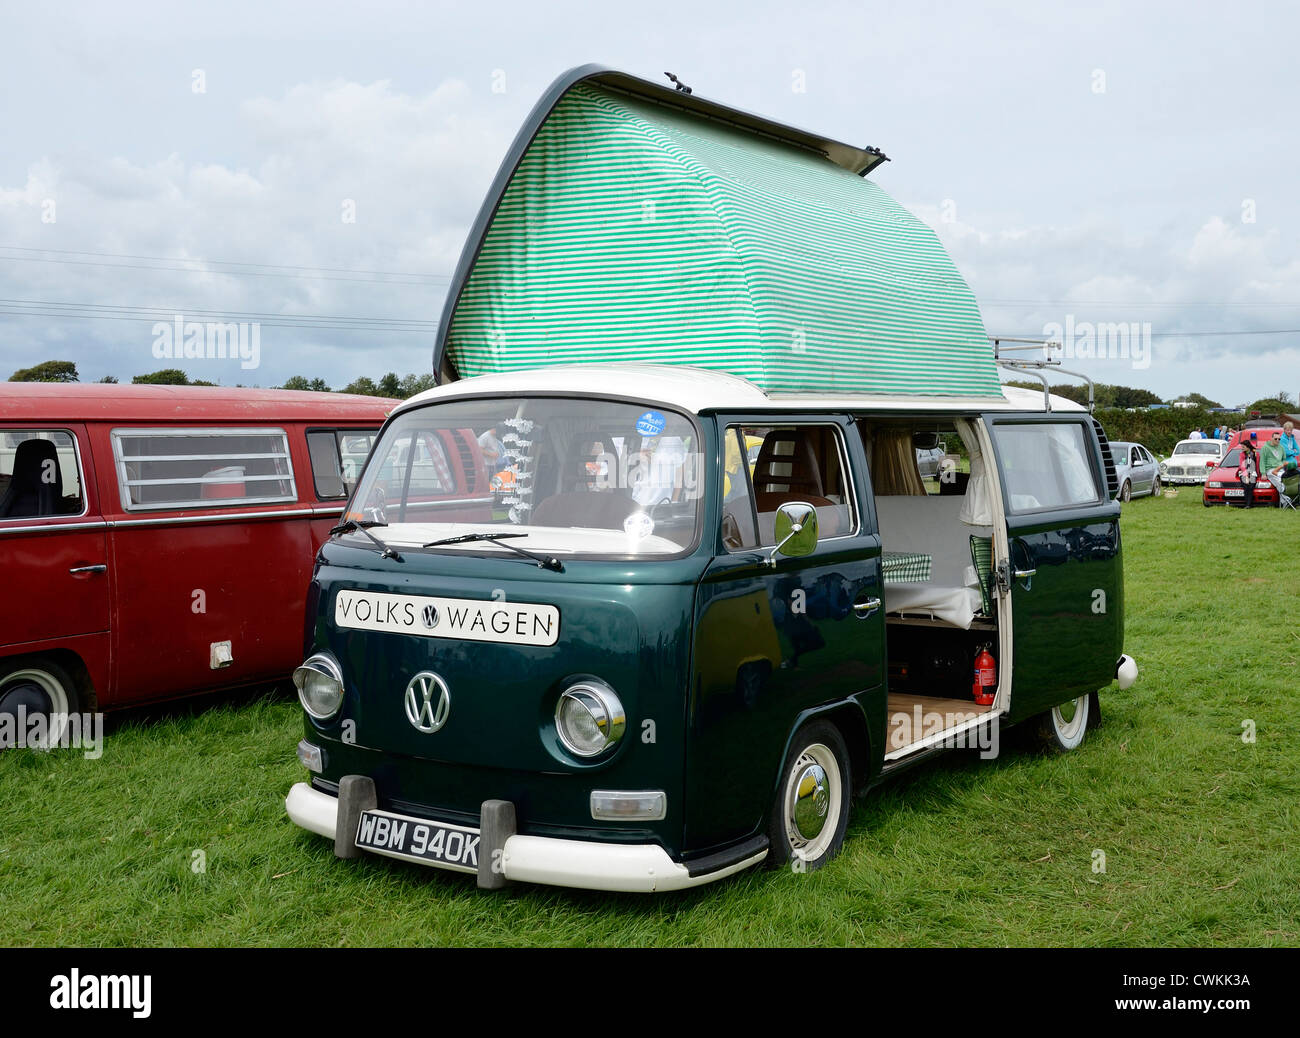 A VW camper van at a Volkswagen rally in Cornwall, UK Stock Photo